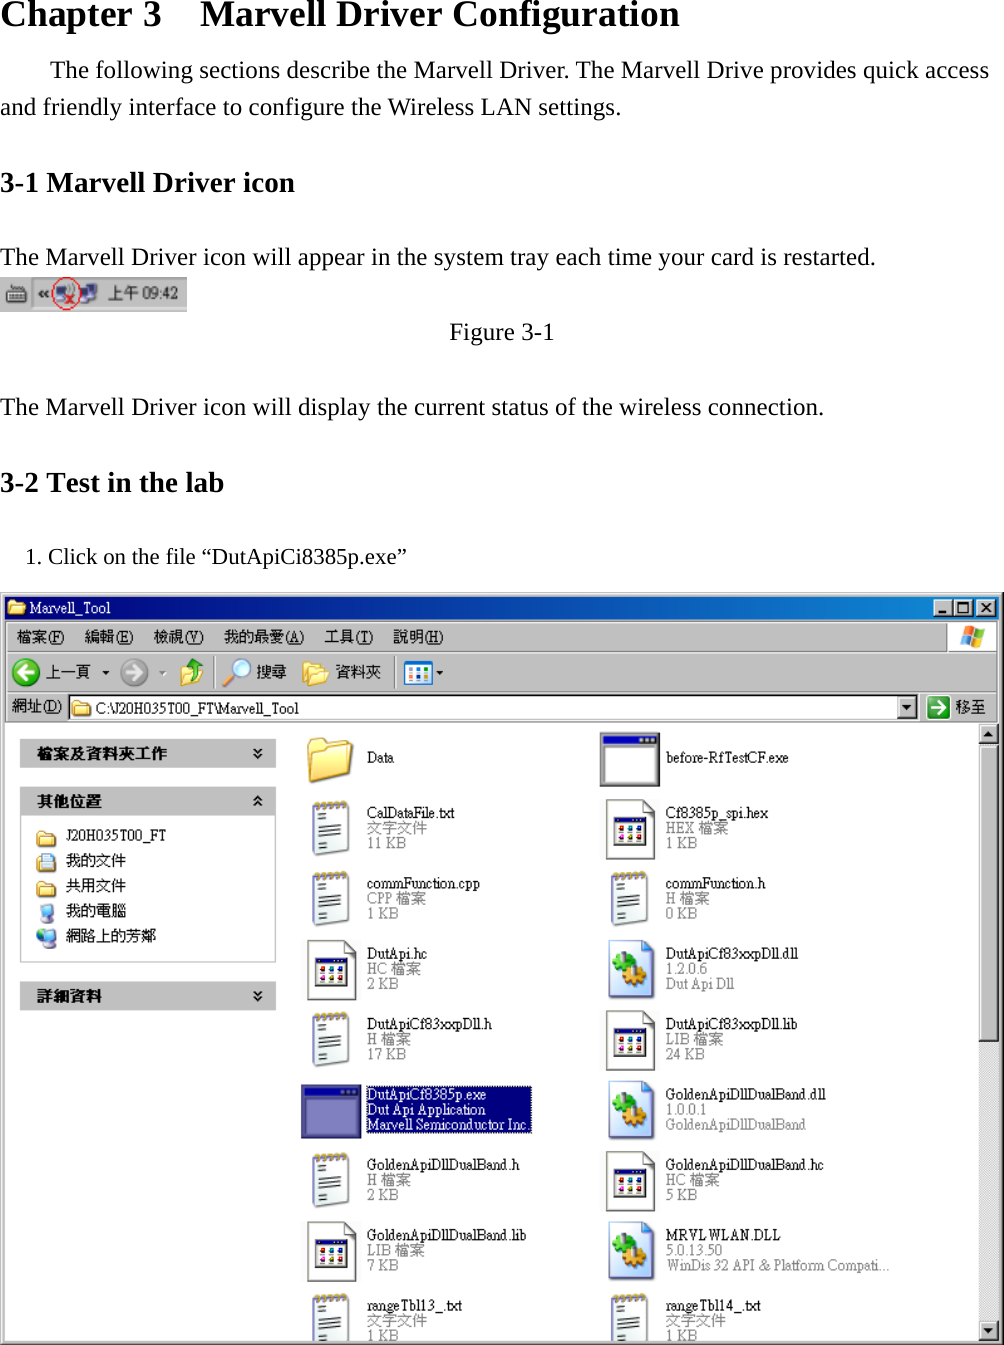  Chapter 3    Marvell Driver Configuration The following sections describe the Marvell Driver. The Marvell Drive provides quick access and friendly interface to configure the Wireless LAN settings.    3-1 Marvell Driver icon    The Marvell Driver icon will appear in the system tray each time your card is restarted.    Figure 3-1  The Marvell Driver icon will display the current status of the wireless connection.  3-2 Test in the lab      1. Click on the file “DutApiCi8385p.exe” 